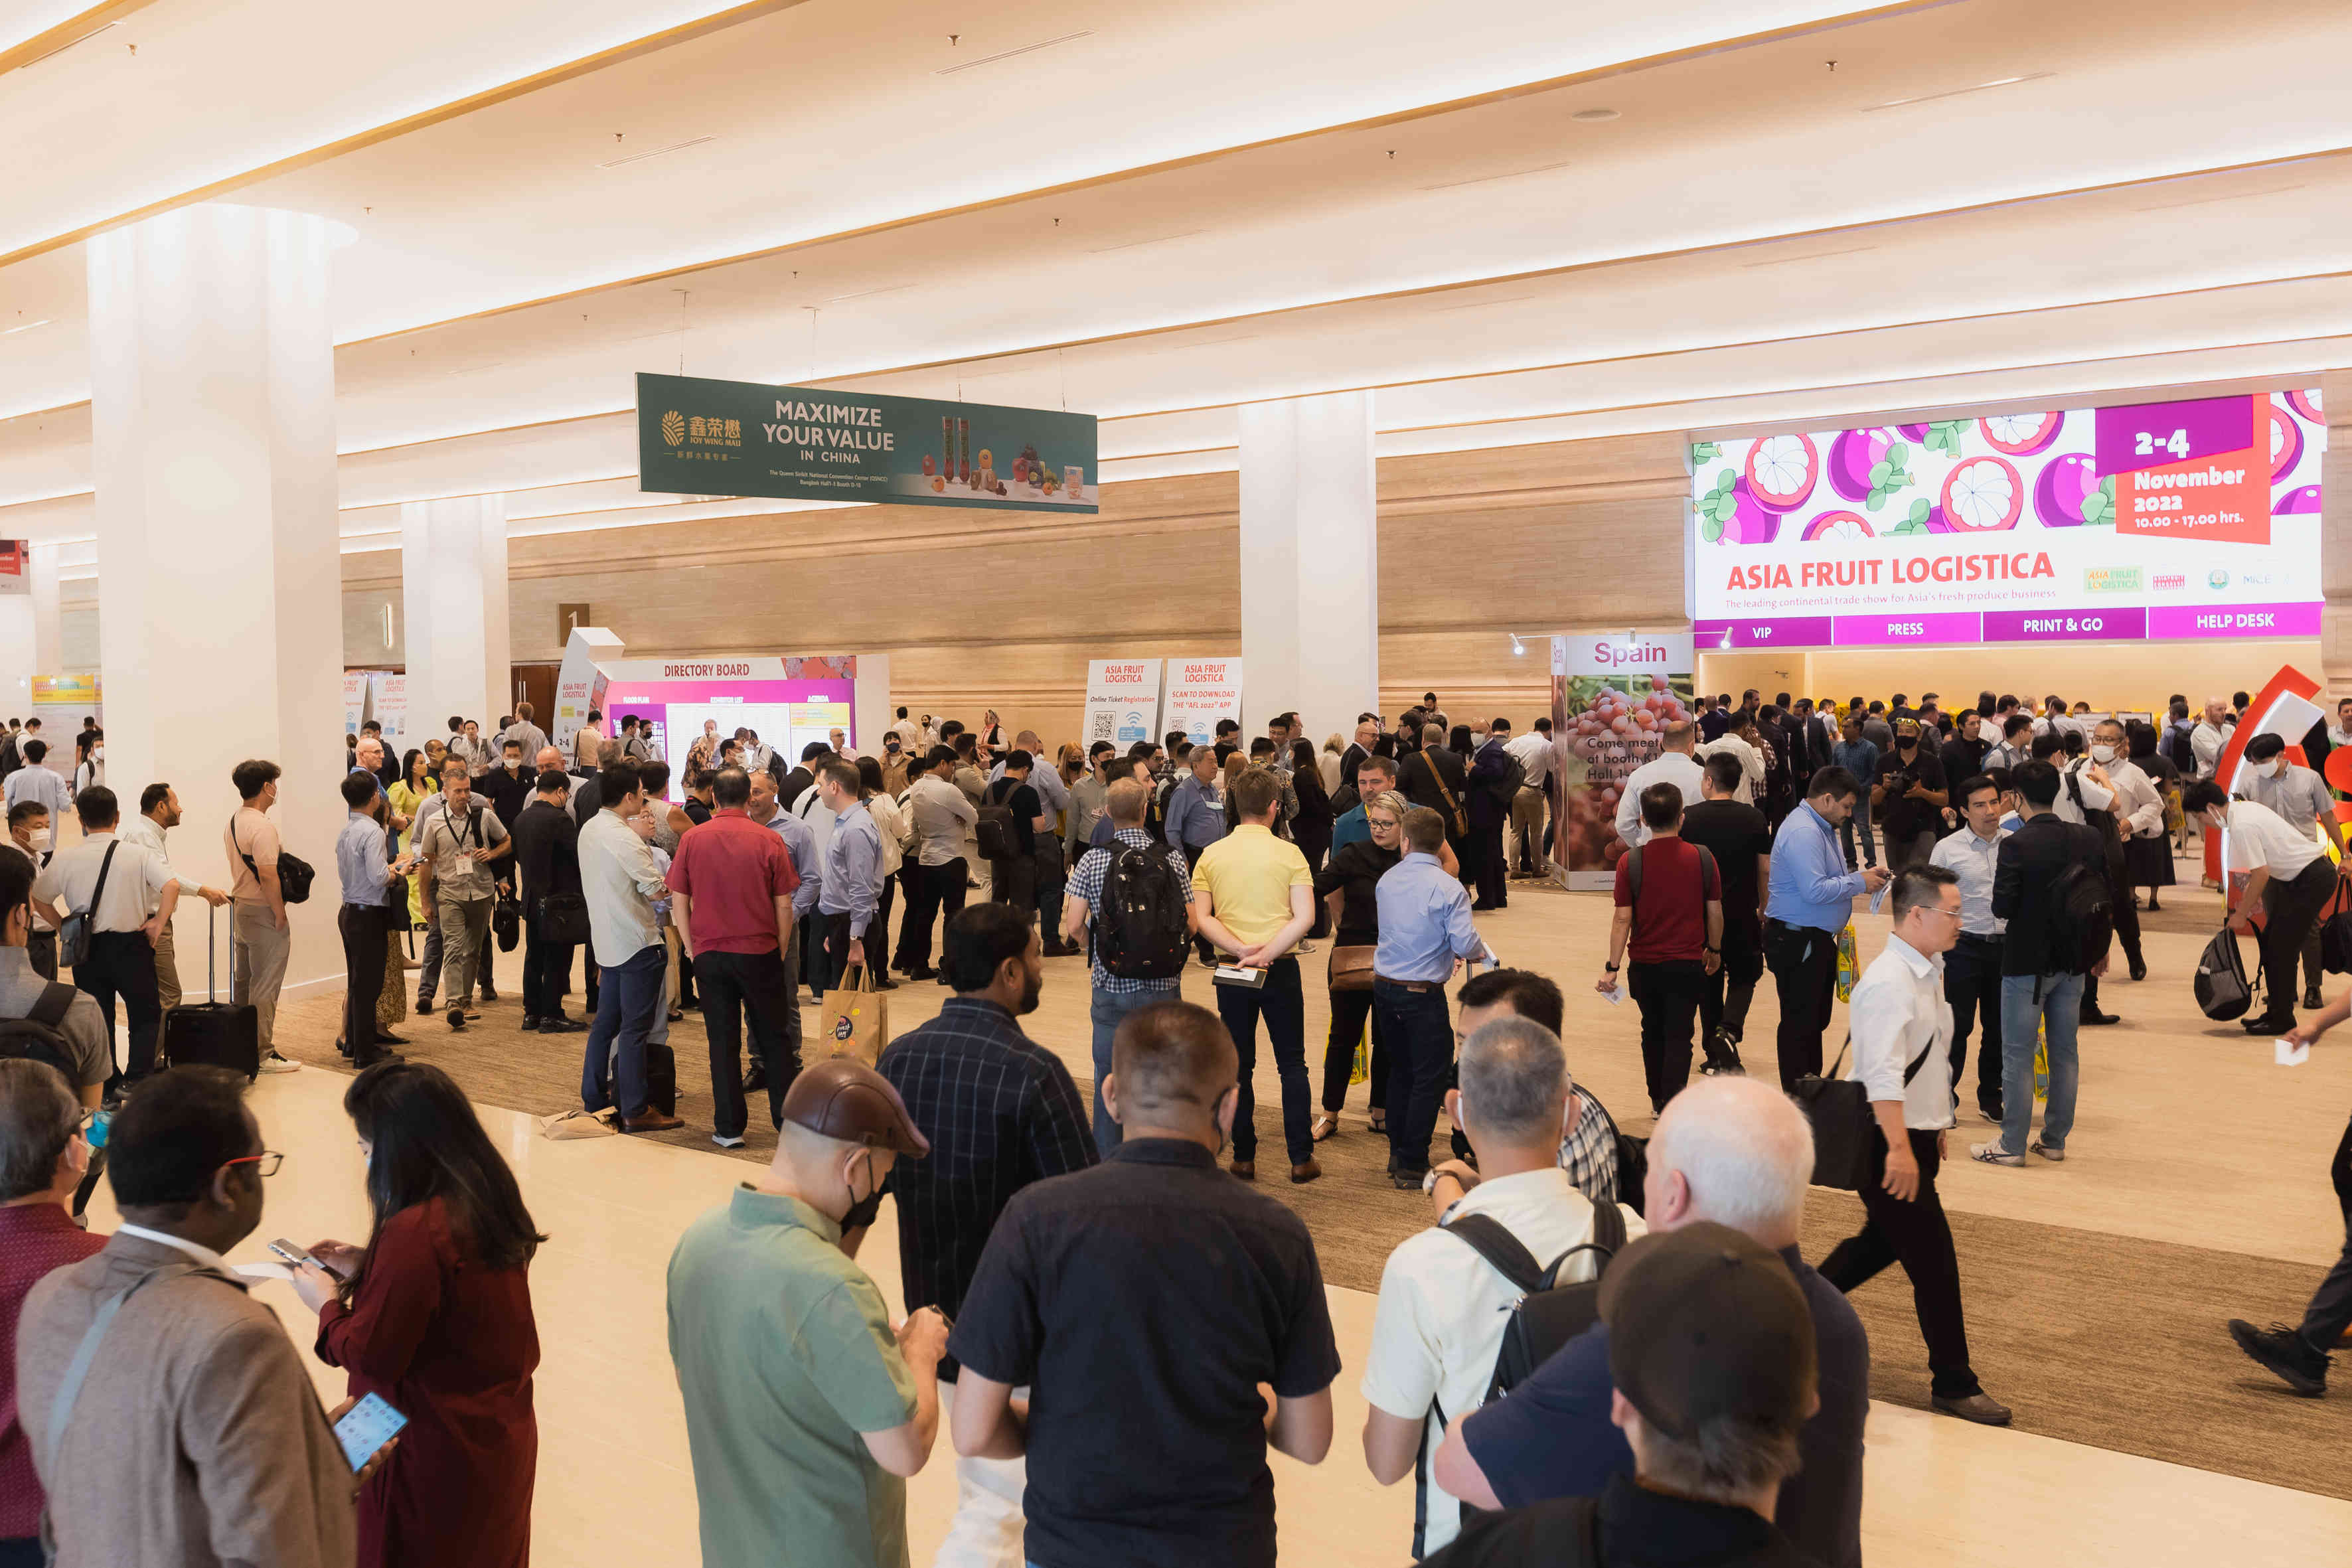 Ticketshop open for ASIA FRUIT LOGISTICA